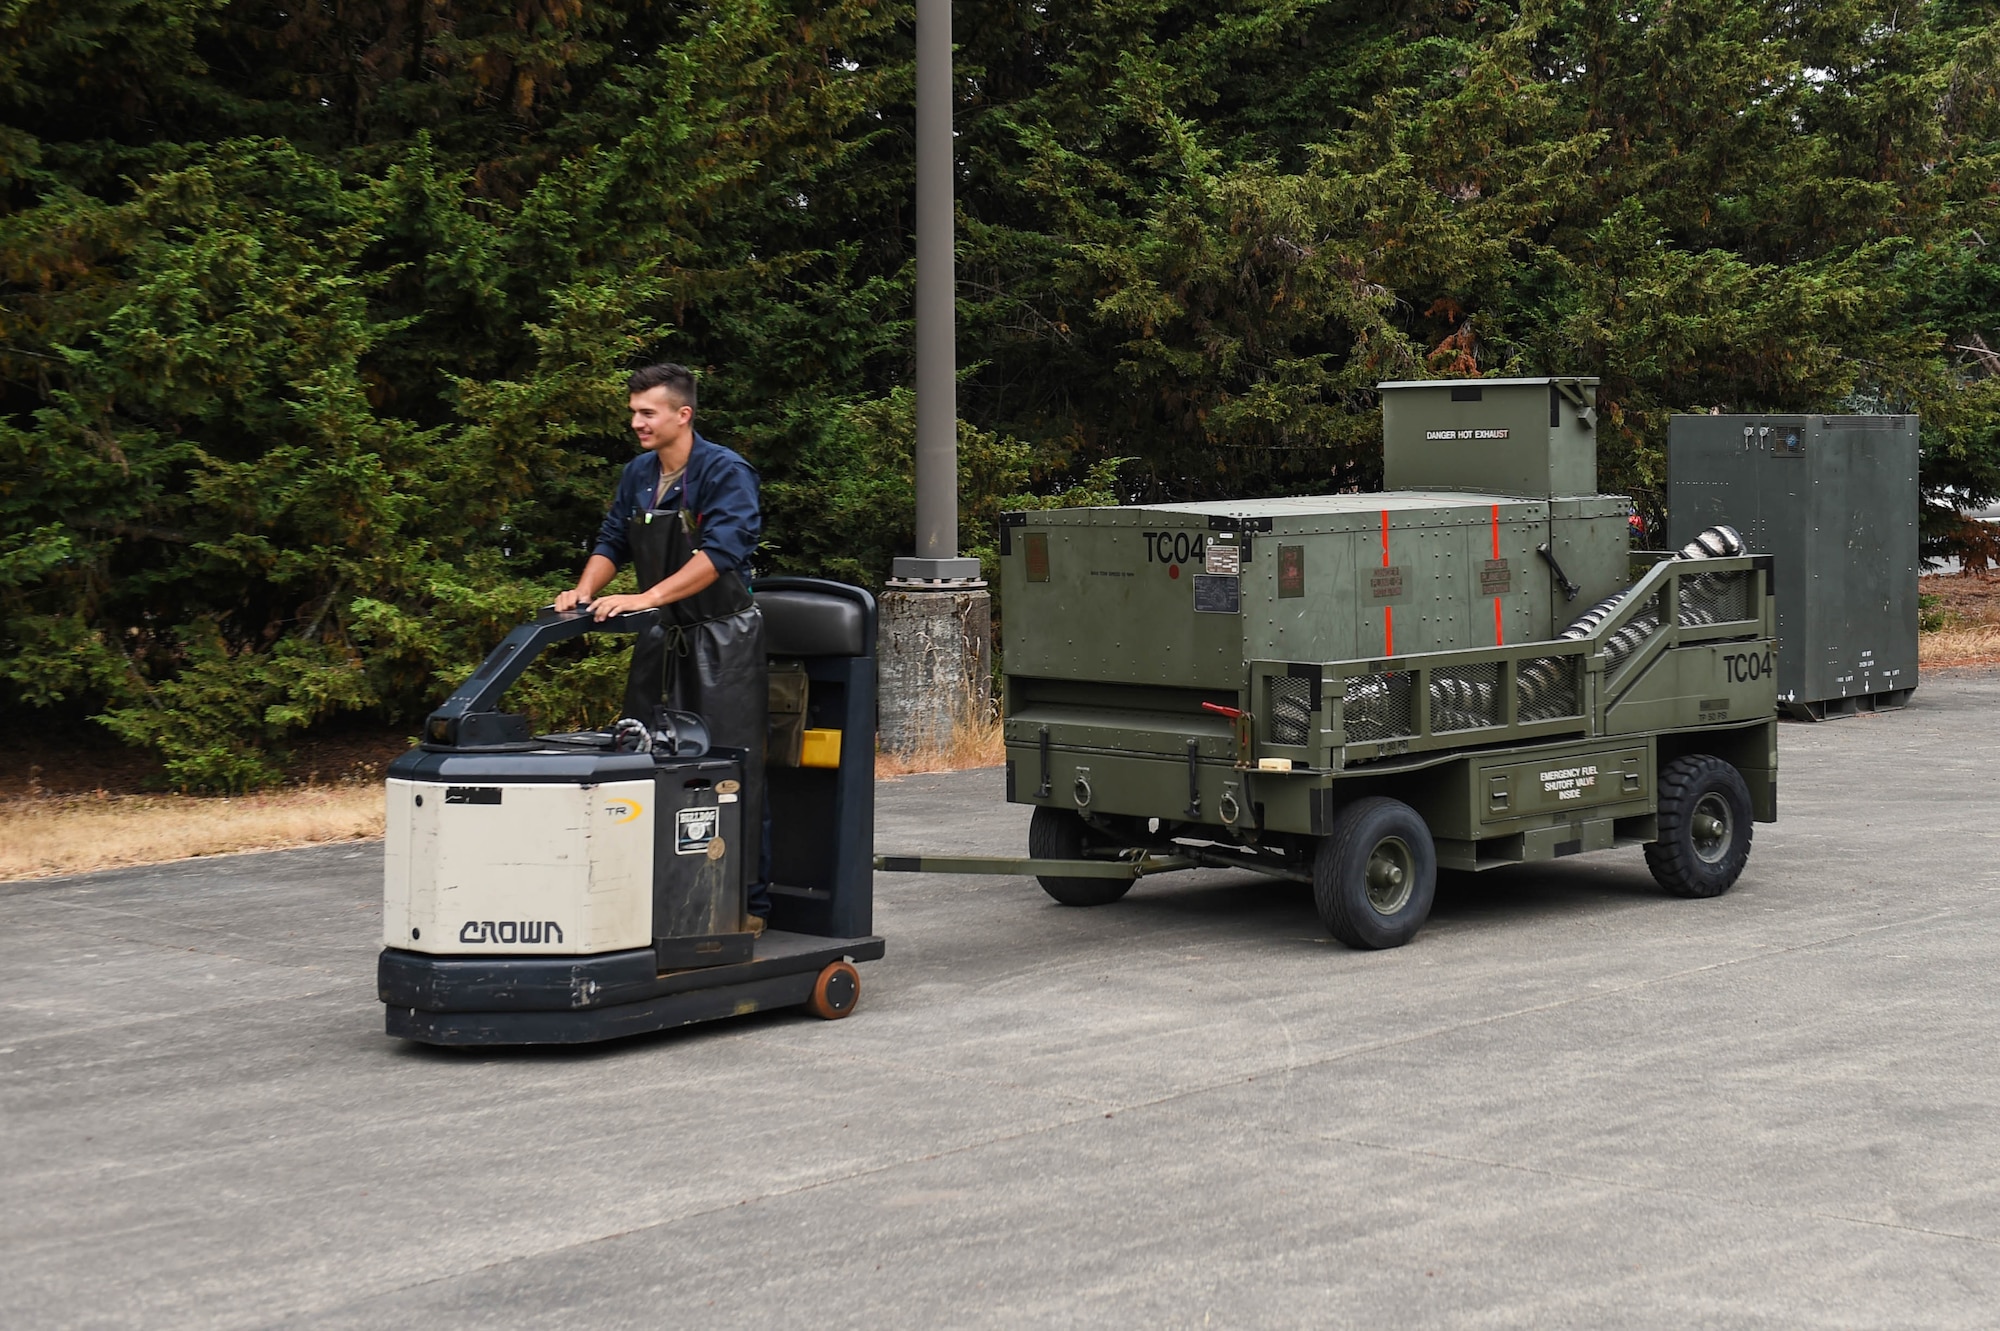 Senior Airman Patrick Christoffersen, 62nd Maintenance Squadron aerospace ground equipment (AGE) journeyman, tows a generator from the AGE storage lot to prepare it for cargo loading onto a C-17 Globemaster III on Joint Base Lewis-McChord, Wash., Aug 3, 2020. The AGE flight within the 62nd MXS provides and maintains various units of equipment that are used on the flight line such as generators, air conditioning units, heaters, and more. (U.S. Air Force photo by Airman 1st Class Mikayla Heineck)